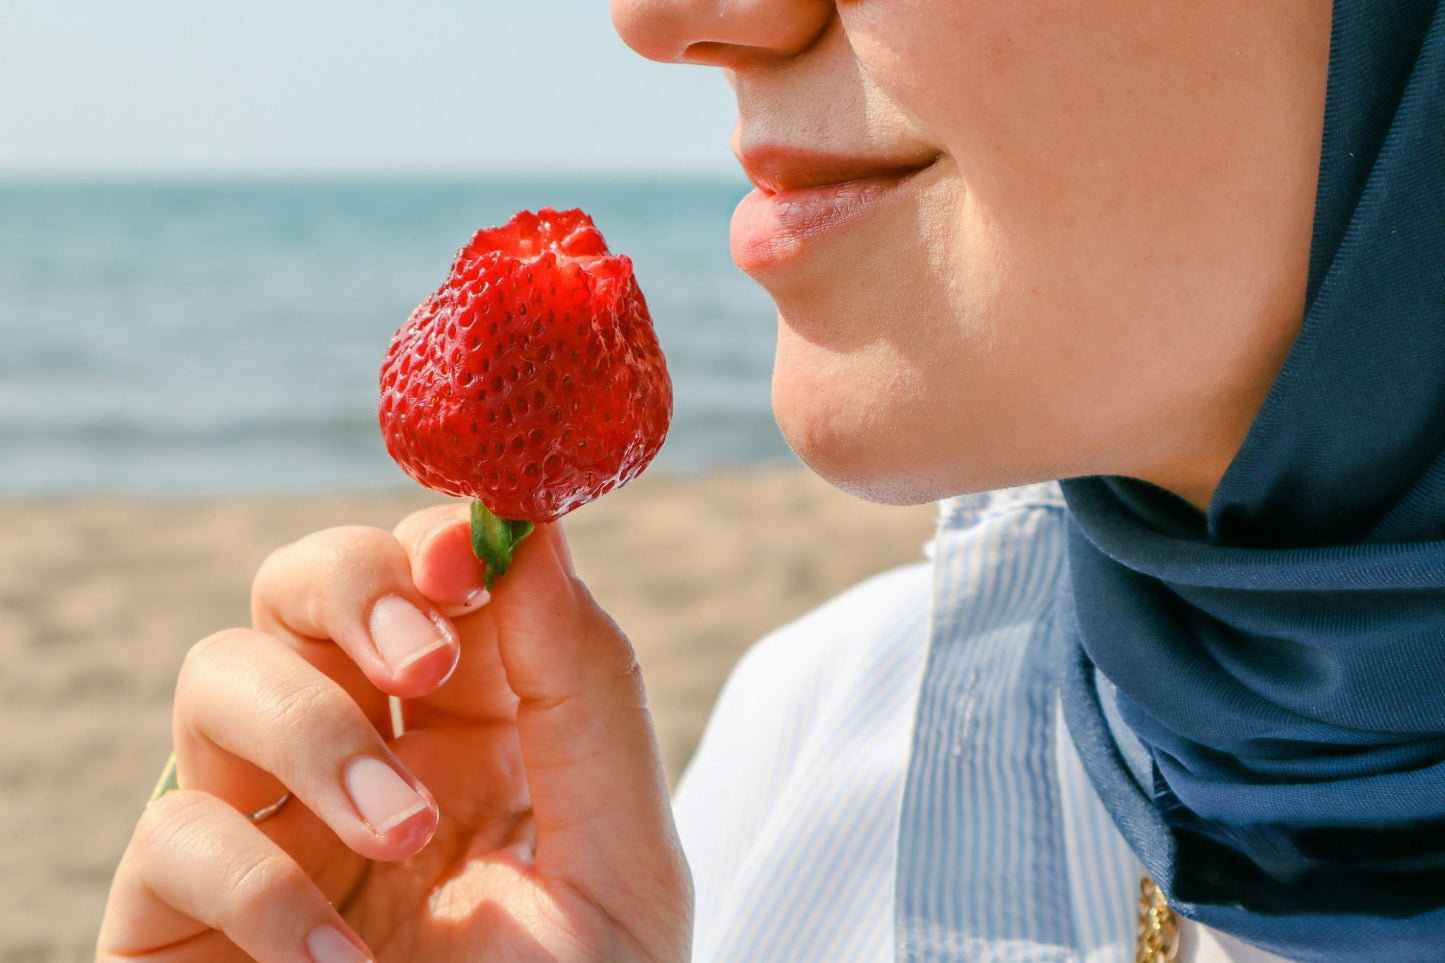 A woman in a headscarf enjoys the natural freshness of a strawberry at the beach, highlighting the benefits of using gentle, skin-friendly deodorant for a confident and odor-free day.